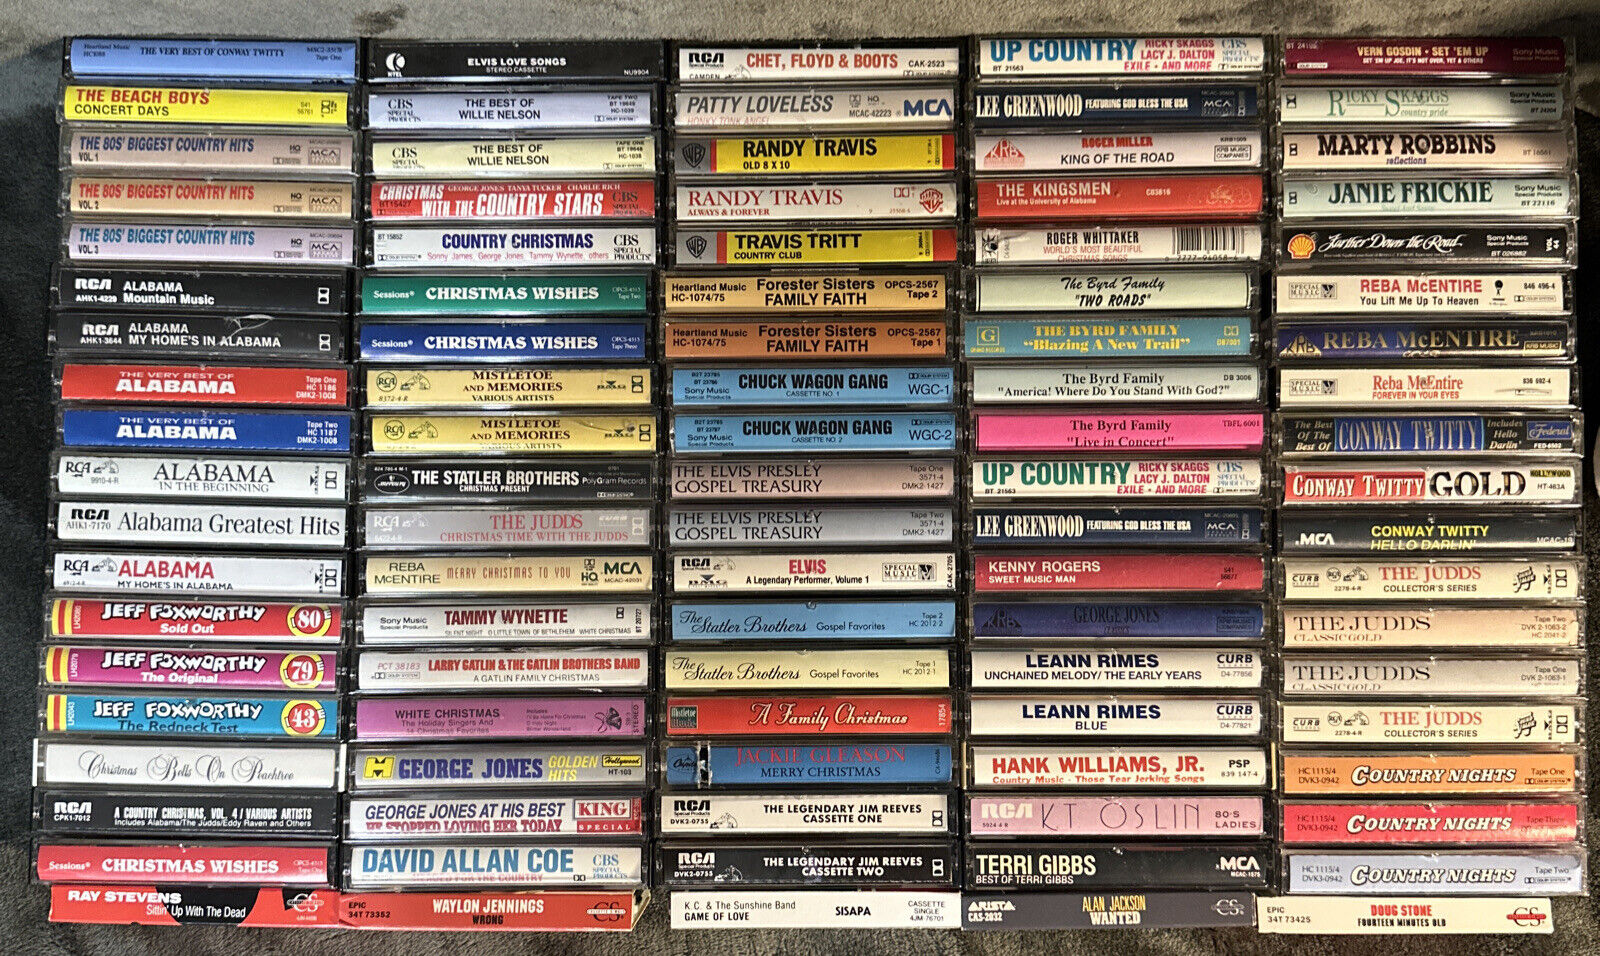 Large Mixed Lot of 95 Country Music Cassette Tapes - Some Rare